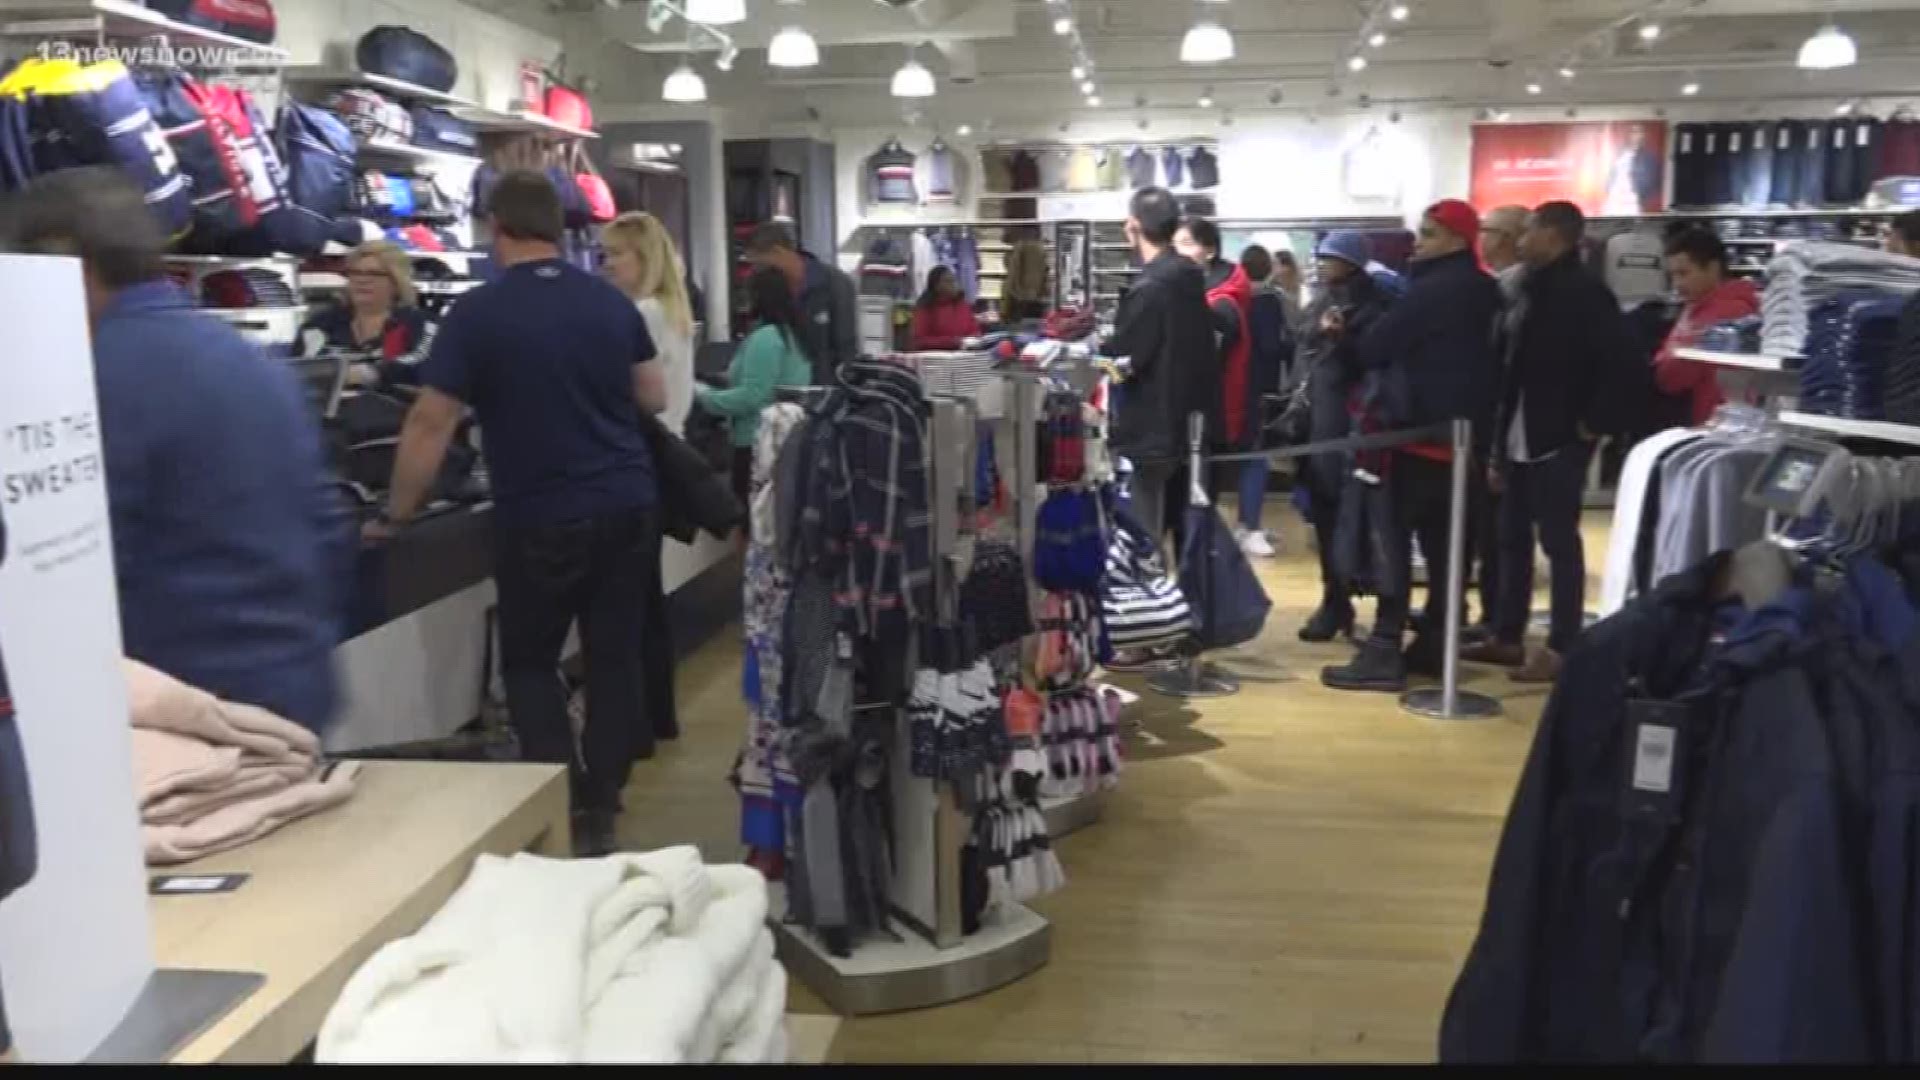 Hundreds packed the Williamsburg Premium Outlets for the Black Friday rush.